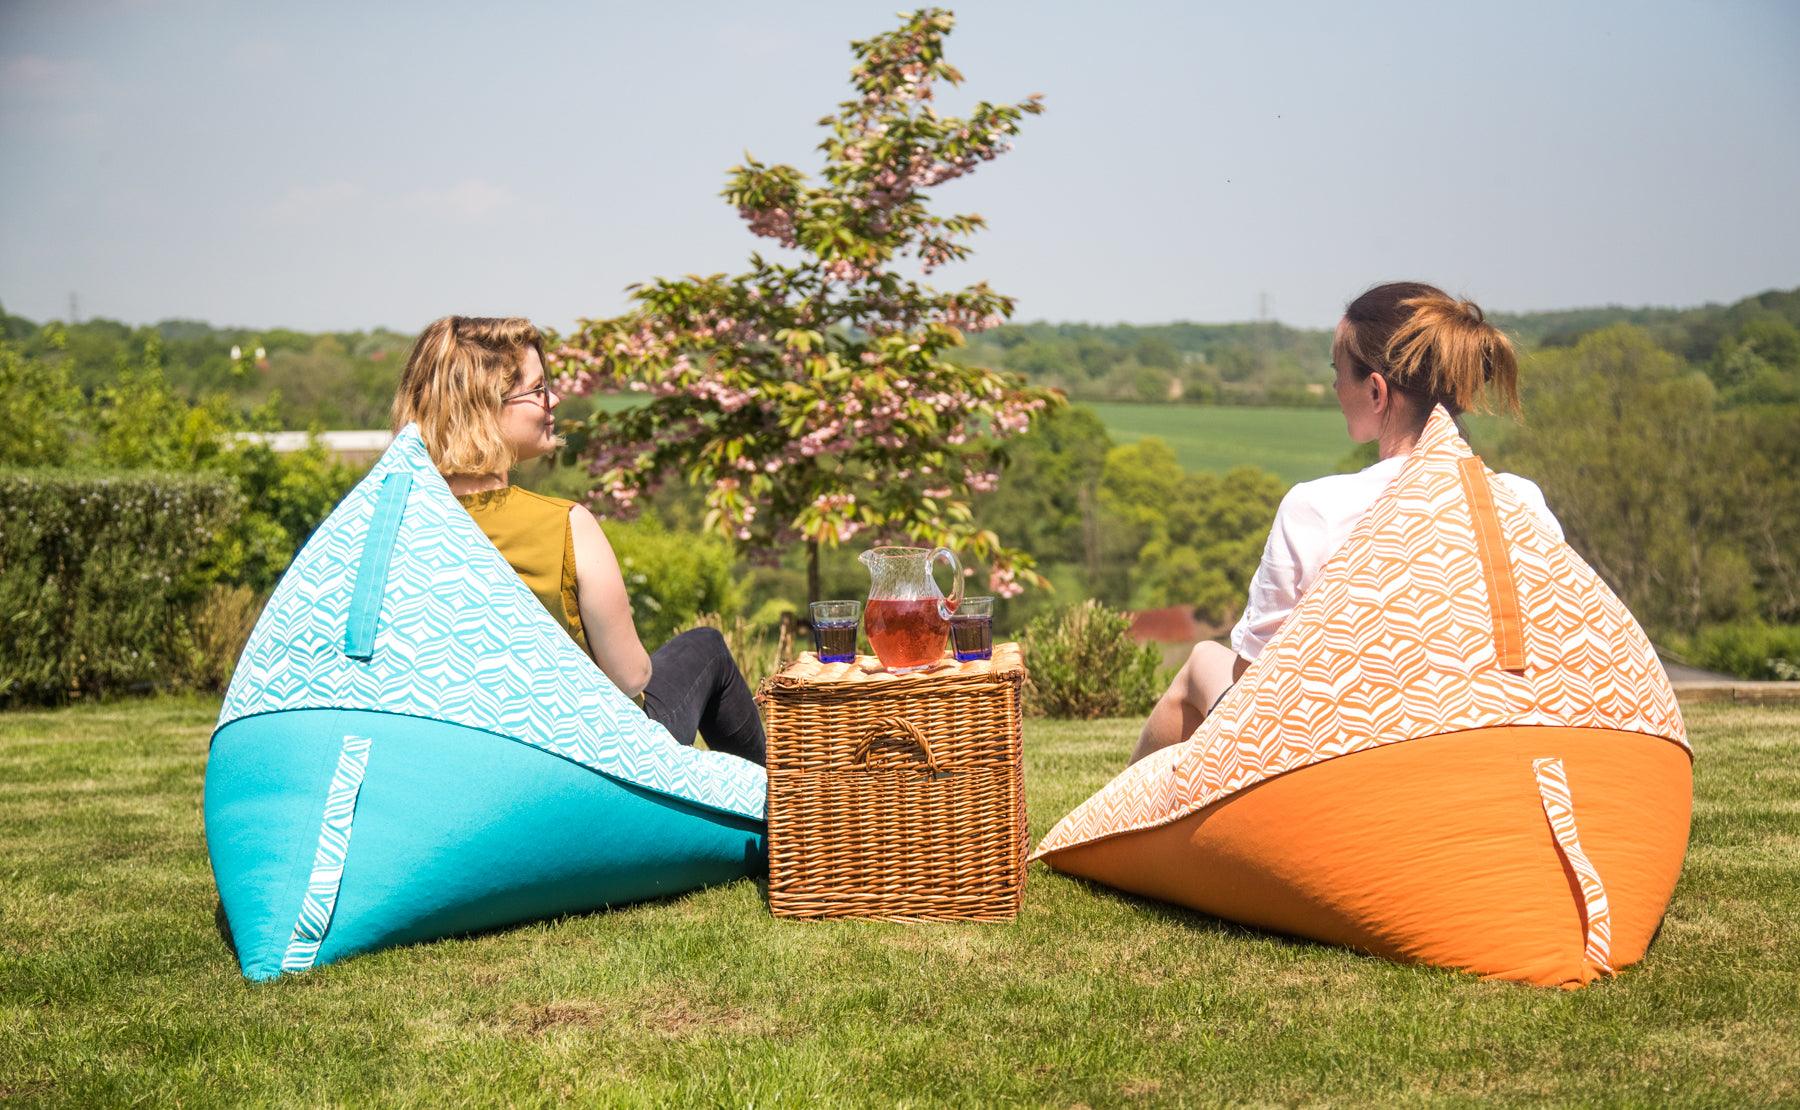 Hosting a garden party? Five essentials to create a relaxed, sociable outdoor space - armadillosun